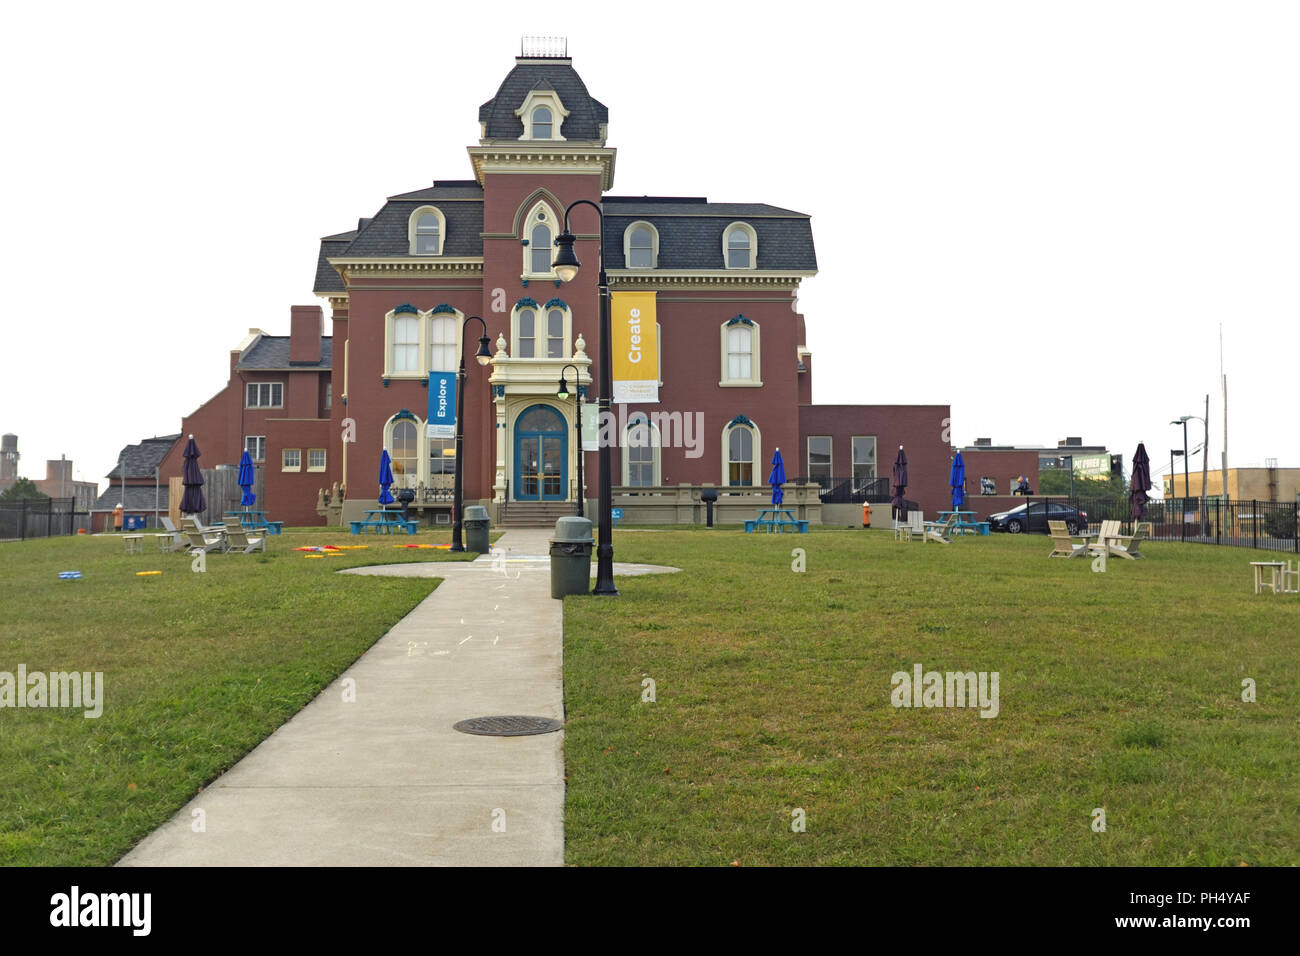 The Children's Museum of Cleveland in Cleveland, Ohio, opened its first permanent location in 2017 in the former Stager-Beckwith Mansion on Euclid Ave Stock Photo